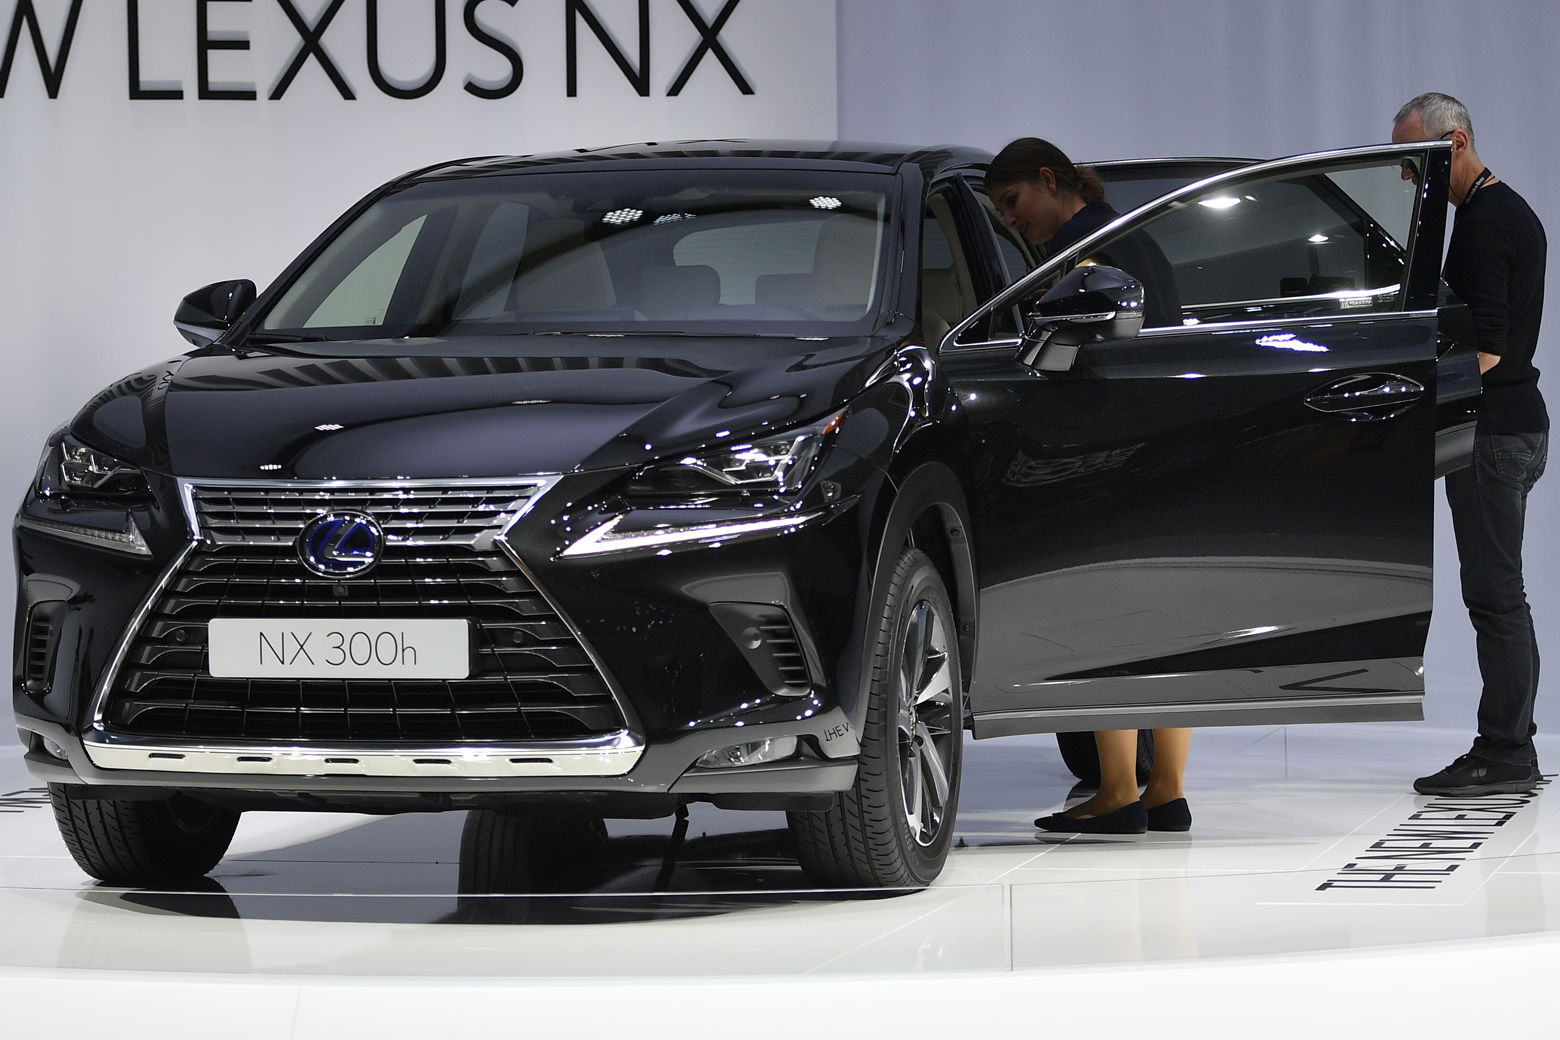 The new Lexus NX is on display during the first media day of the International Frankfurt Motor Show IAA in Frankfurt, Germany, Tuesday, Sept. 12, 2017, which runs through Sept. 24, 2017. (AP Photo/Martin Meissner)